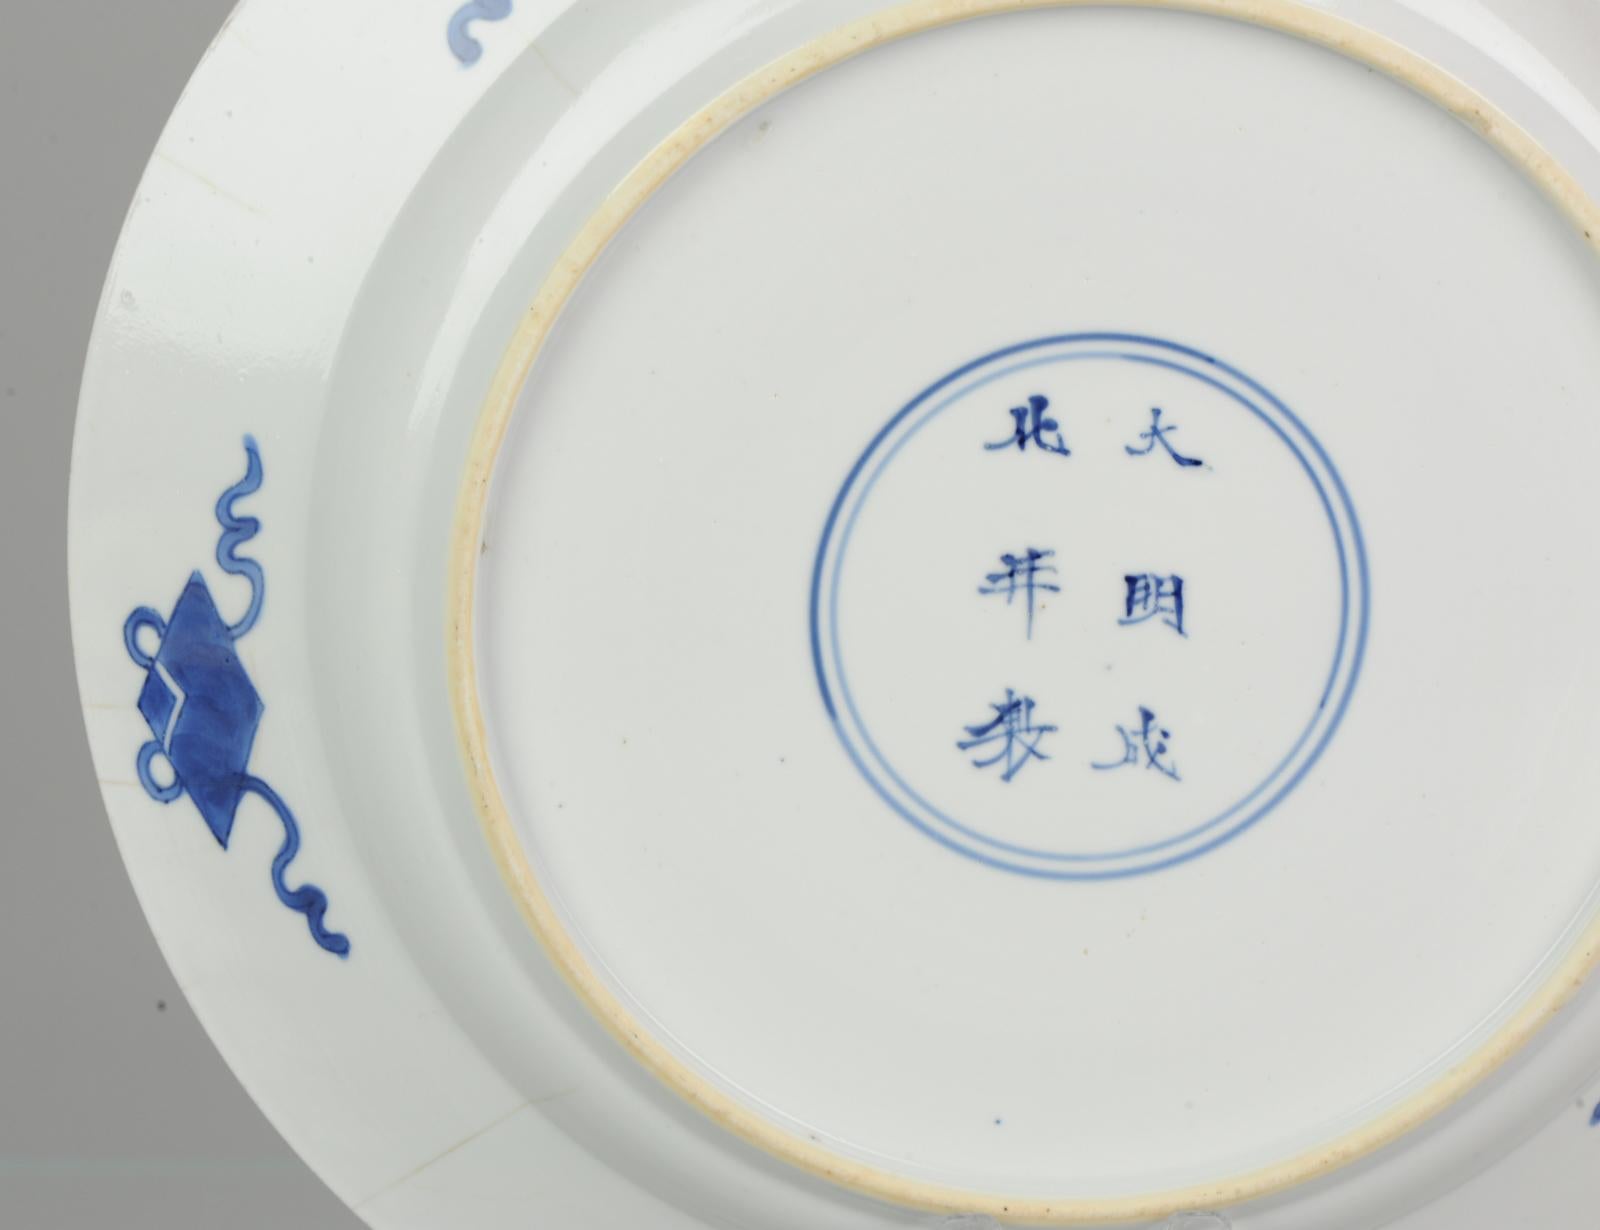 18th Century Antique Kangxi Chinese Porcelain Literati Blue and White Figural Plate Marked